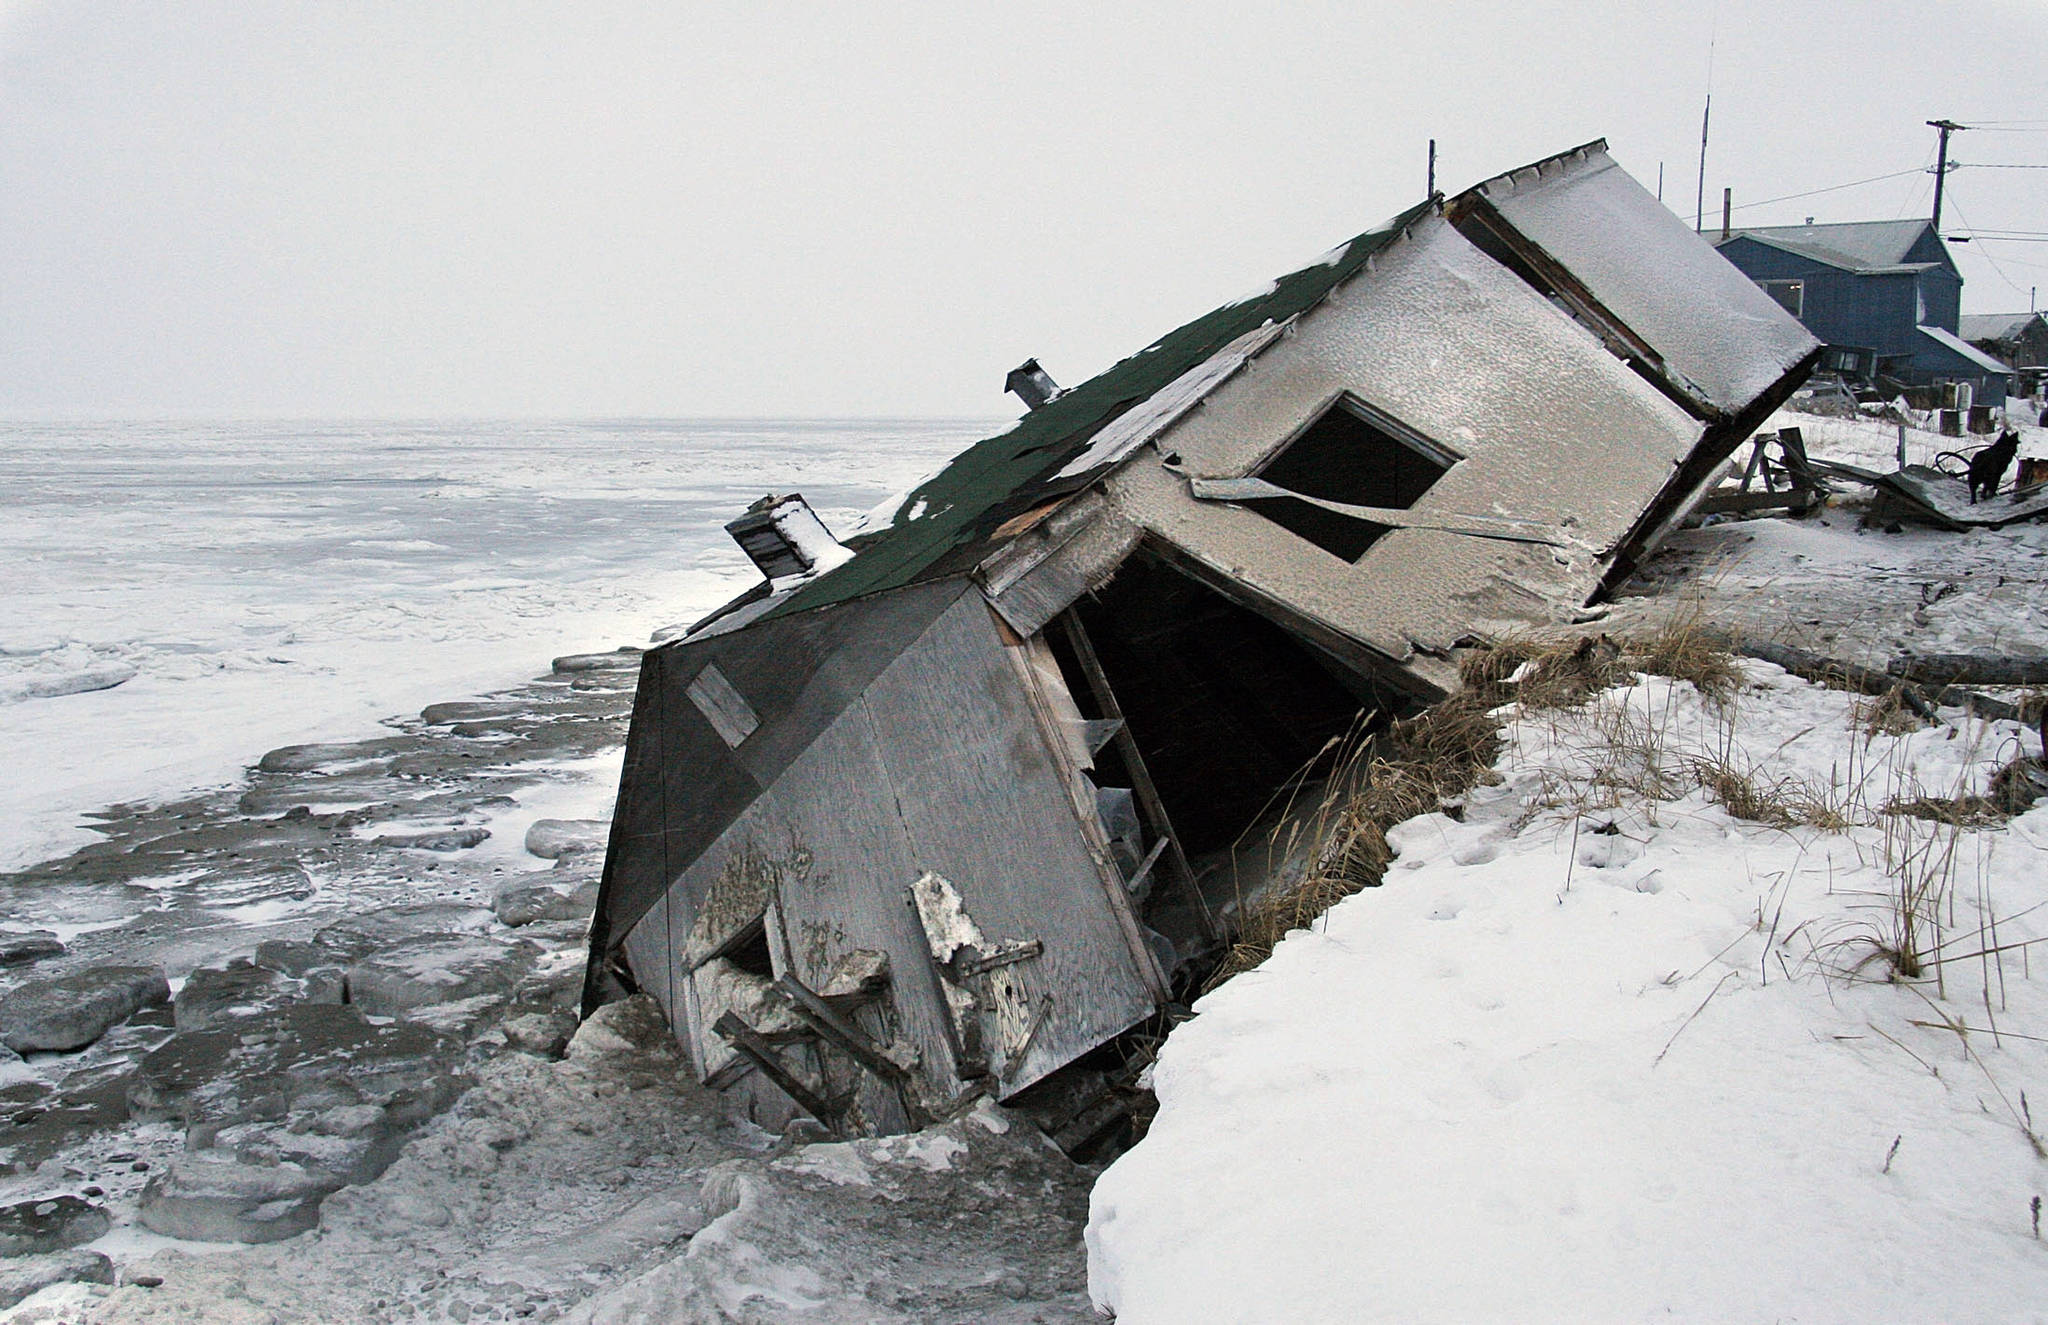 In this Dec. 8, 2006 photo, Nathan Weyiouanna’s abandoned house at the west end of Shishmaref, Alaska, sits on the beach after sliding off during a fall storm in 2005. Alaska health officials are warning that serious health issues could crop up as the state warms. A report by the Alaska Division of Public Health released this week says longer growing seasons and fewer deaths from exposure are likely positive outcomes from climate change. But the 77-page report says additional diseases, lower air quality from more wildfires, melting permafrost and disturbances to local food sources also are potential outcomes. Warming already has thawed soil and eroded coastlines, leading at least three villages, Shishmaref, Kivalina and Newtok to consider relocating. (Diana Haecker | The Associated Press File)